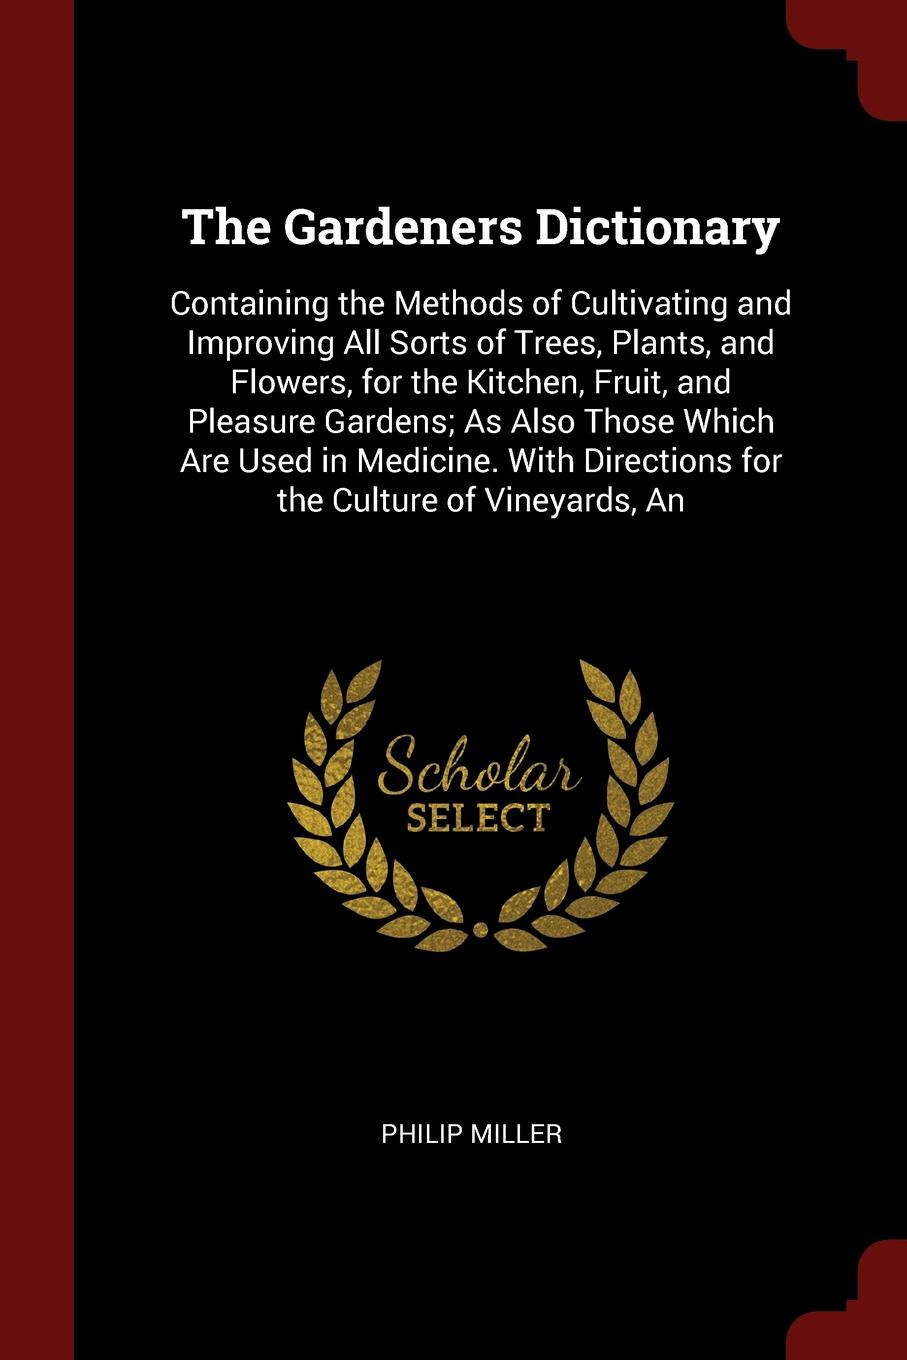 The Gardeners Dictionary. Containing the Methods of Cultivating and Improving All Sorts of Trees, Plants, and Flowers, for the Kitchen, Fruit, and Pleasure Gardens; As Also Those Which Are Used in Medicine. With Directions for the Culture of Viney...